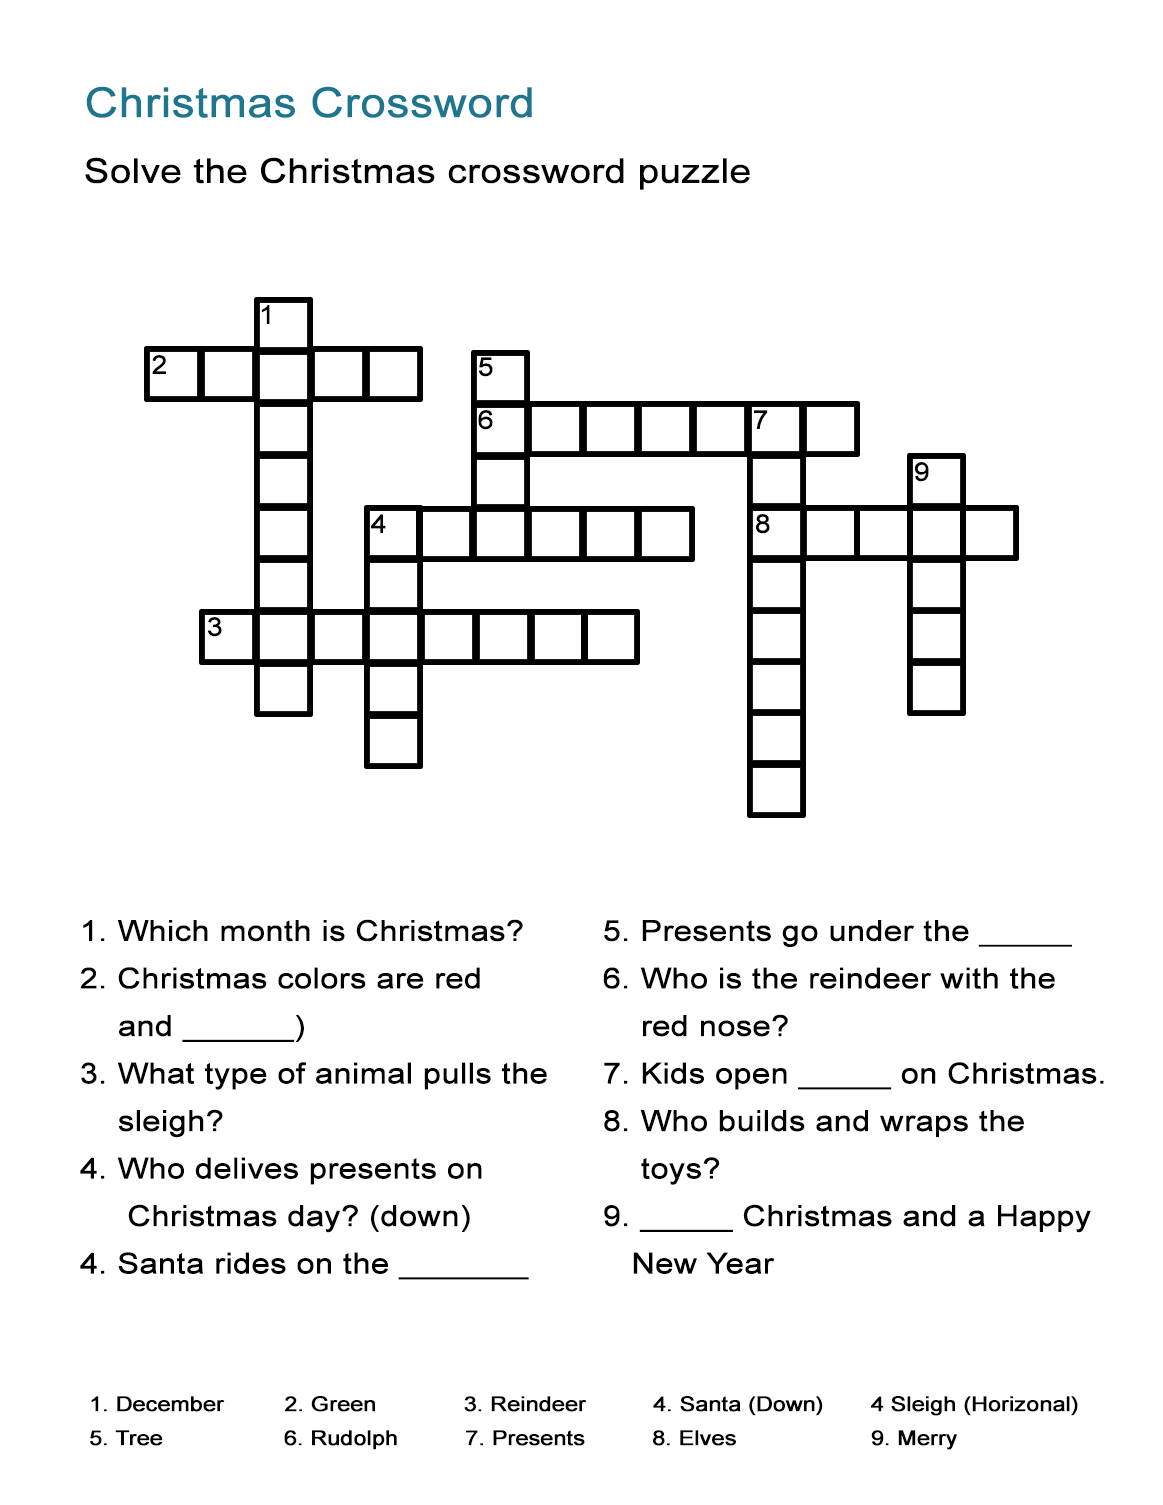 Christmas Crossword Puzzle: Uncover Christmas Words In This - Printable Holiday Crossword Puzzles For Adults With Answers